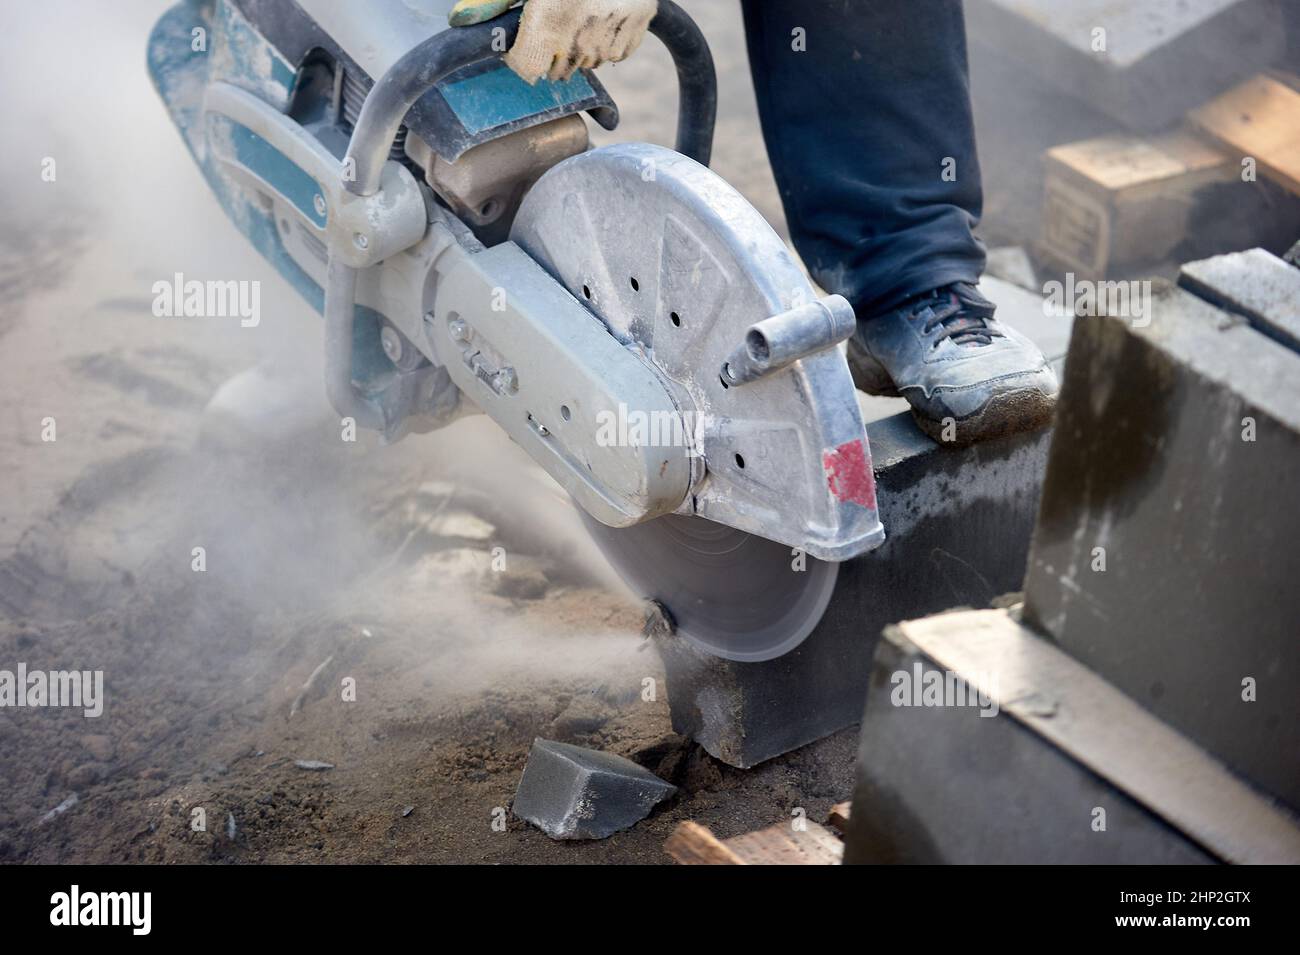 A worker with a circular saw cuts a curb stone close-up. High quality photo Stock Photo